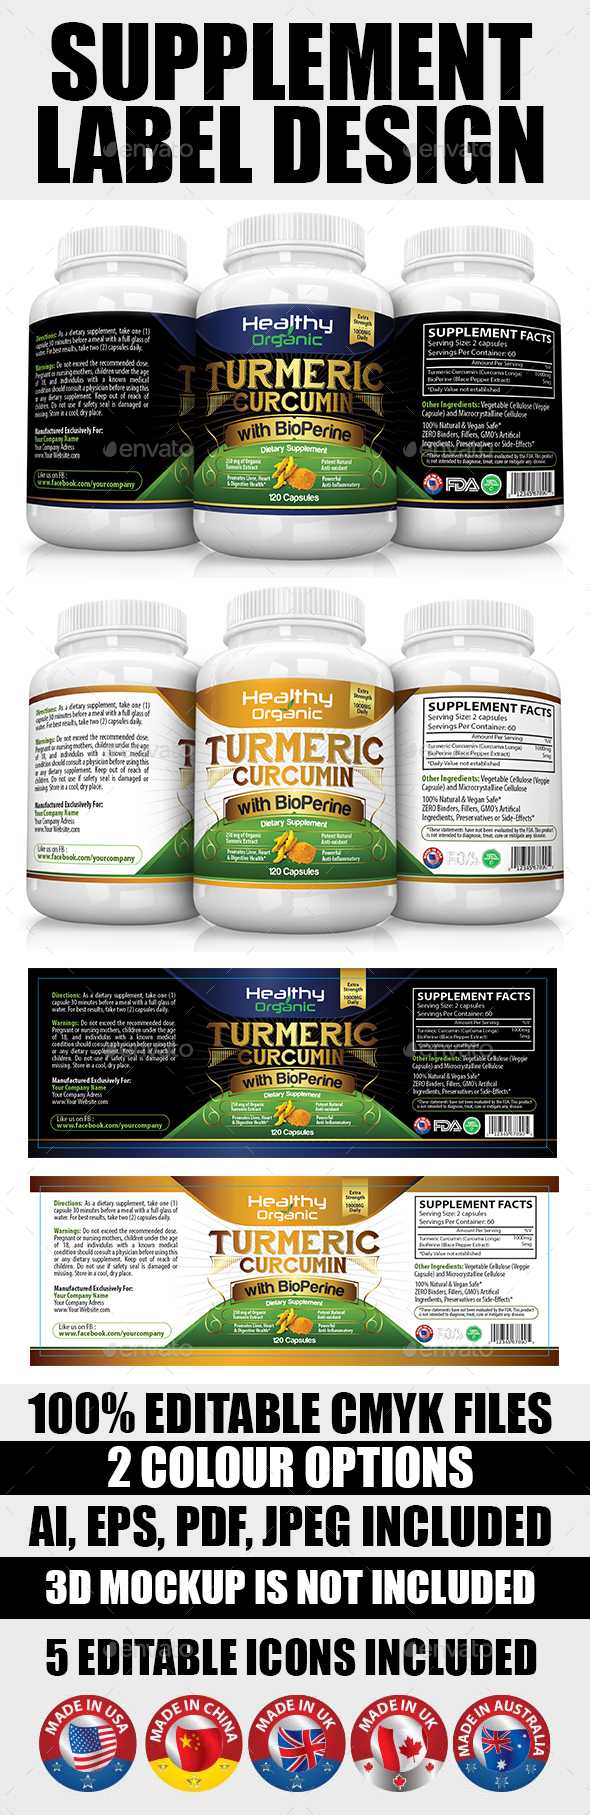 Cambogia And Label Packaging Templates From Graphicriver In Dietary Supplement Label Template